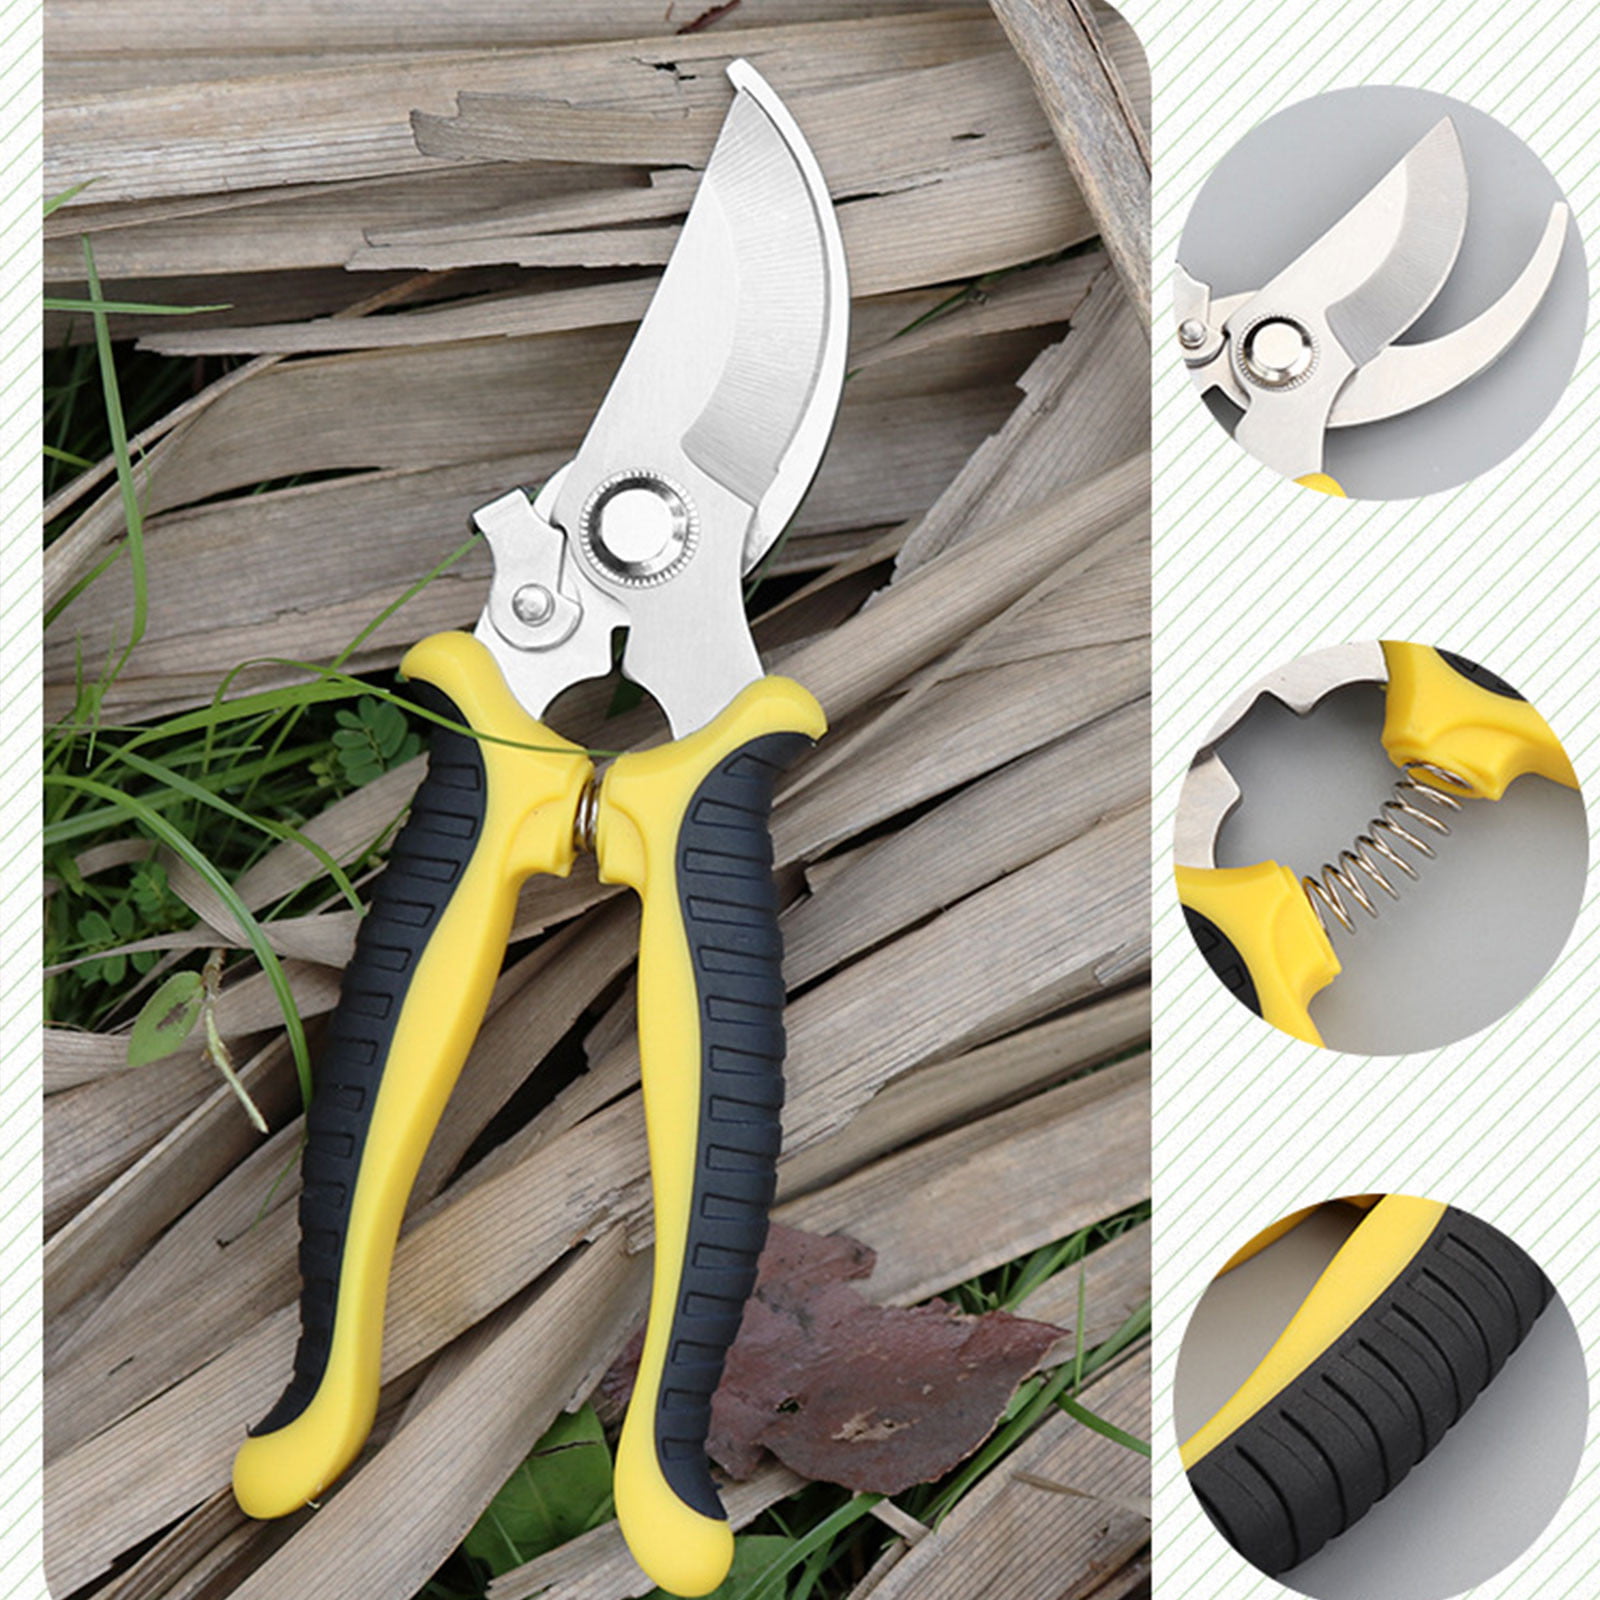 Haus & Garten ClassicPRO 8.5 Bypass Pruning Shears - Premium Garden Shears  - Use As Gardening Shears, Garden Clippers, Handheld Heavy-Duty  Professional Pruning…